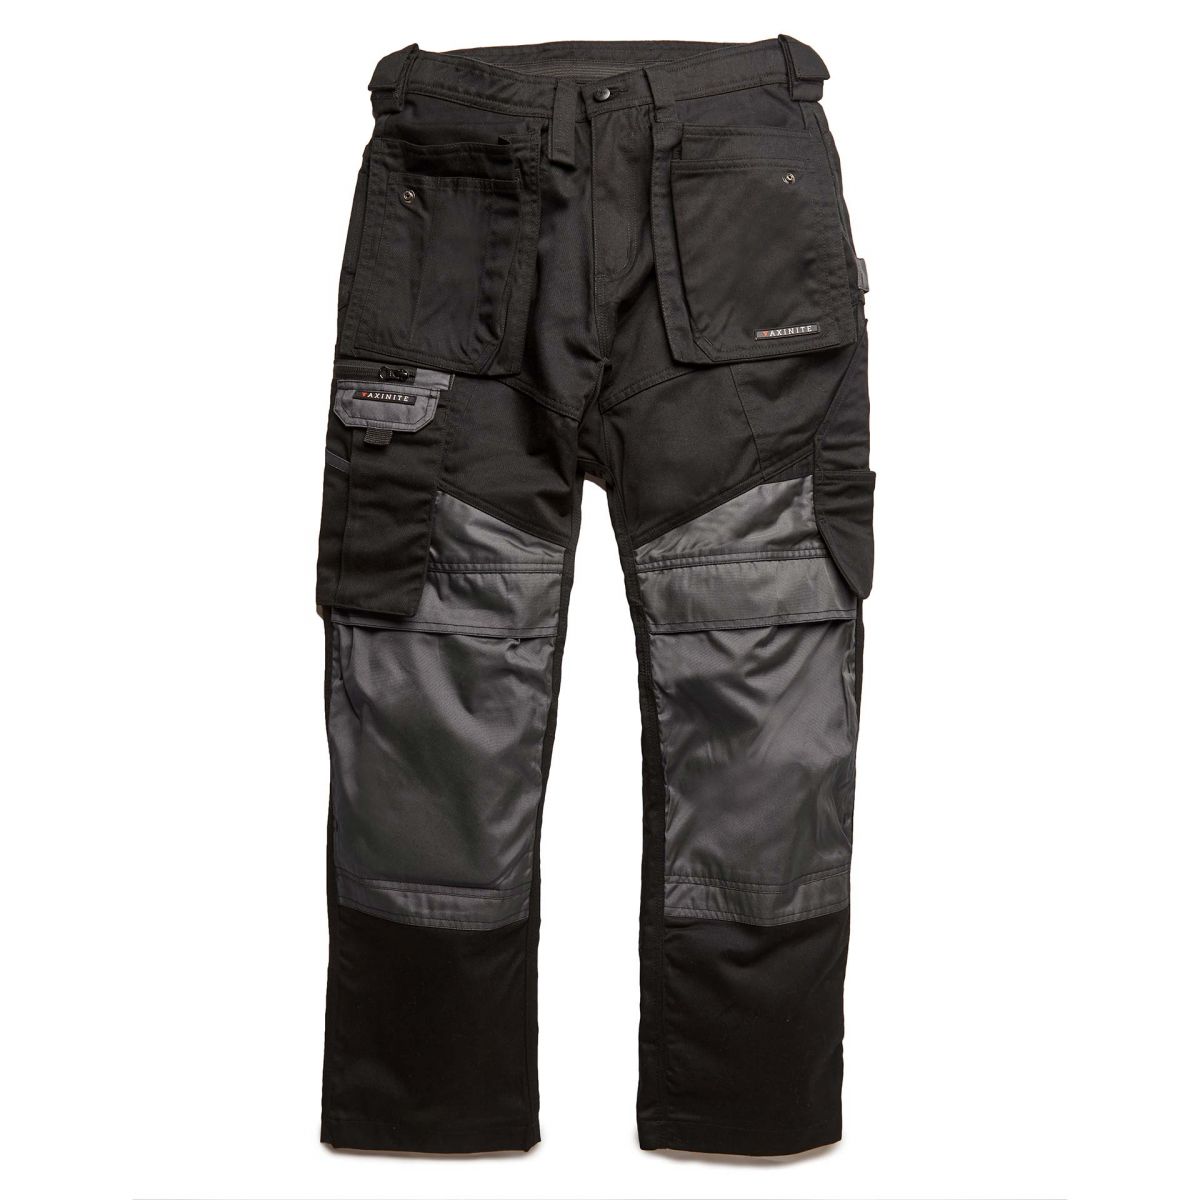 View Axinite AX39 Workwear Trousers Black 30L information